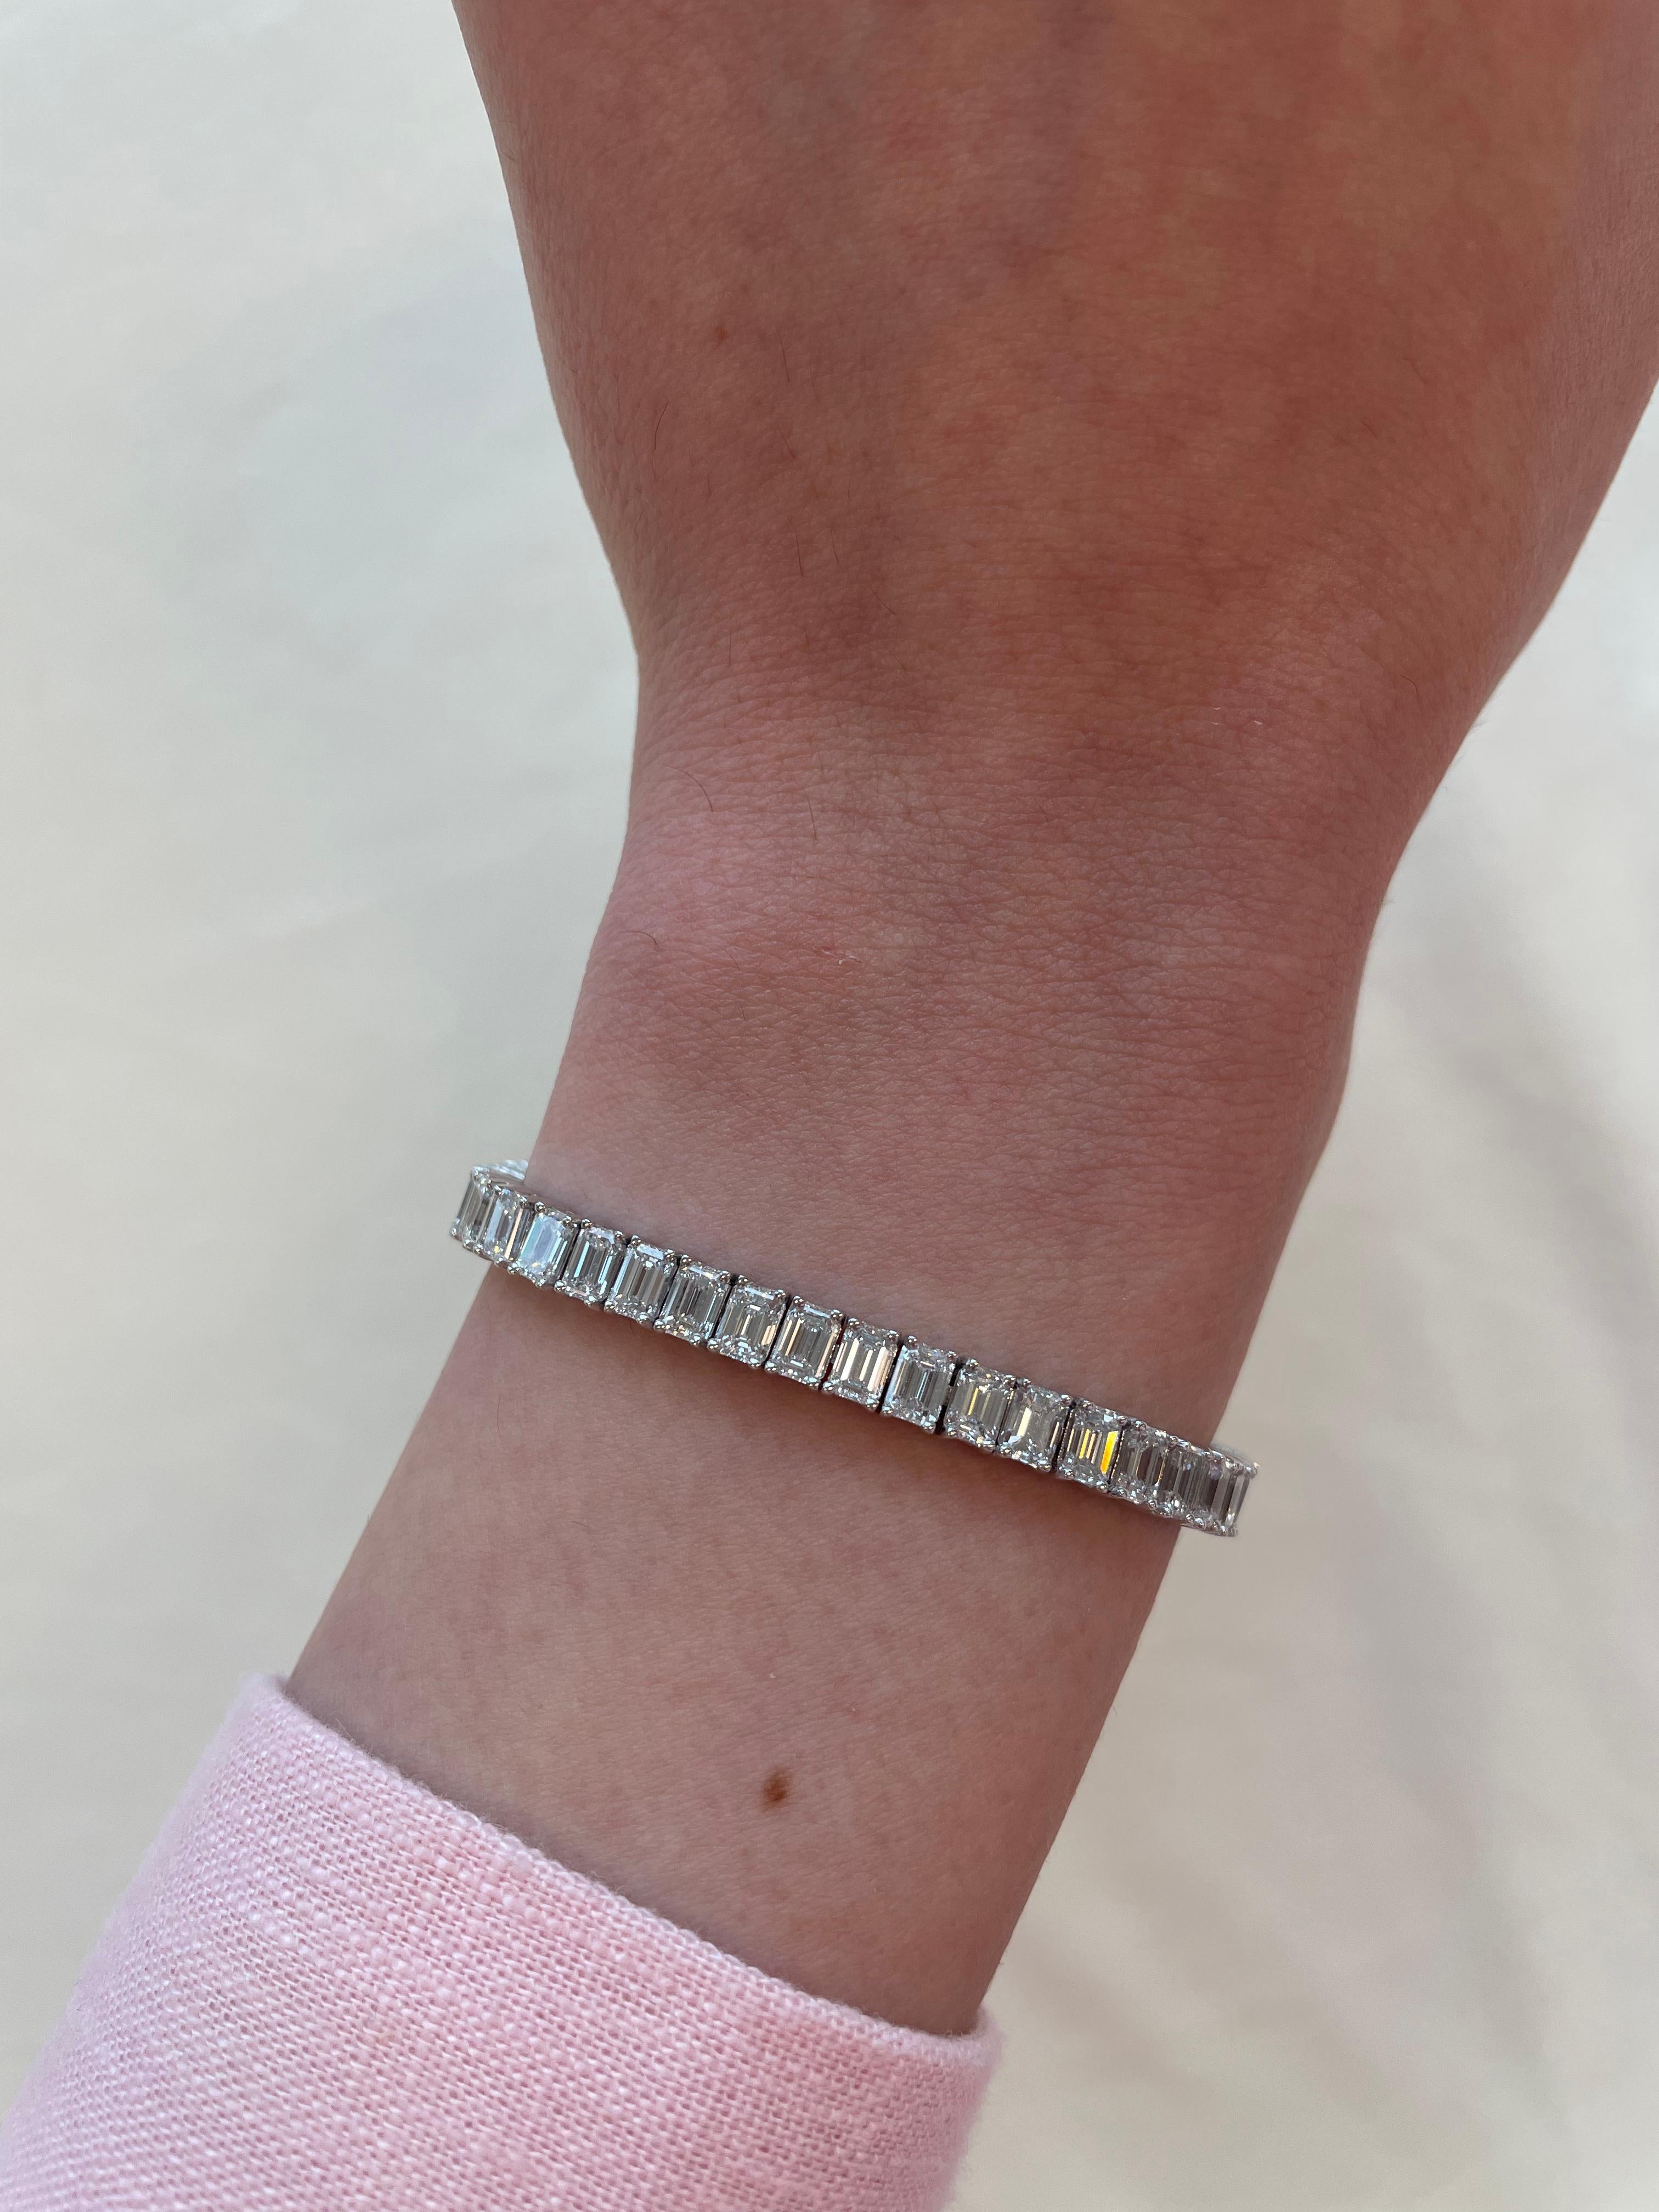 Stunning modern straight emerald cut diamond tennis bracelet. High jewelry by Alexander Beverly Hills.
52 emerald cut diamonds, 12.65 carats. Approximately F/G color and VVS clarity. 18k white gold, 18.16 grams, 7 inches.
Accommodated with an up to